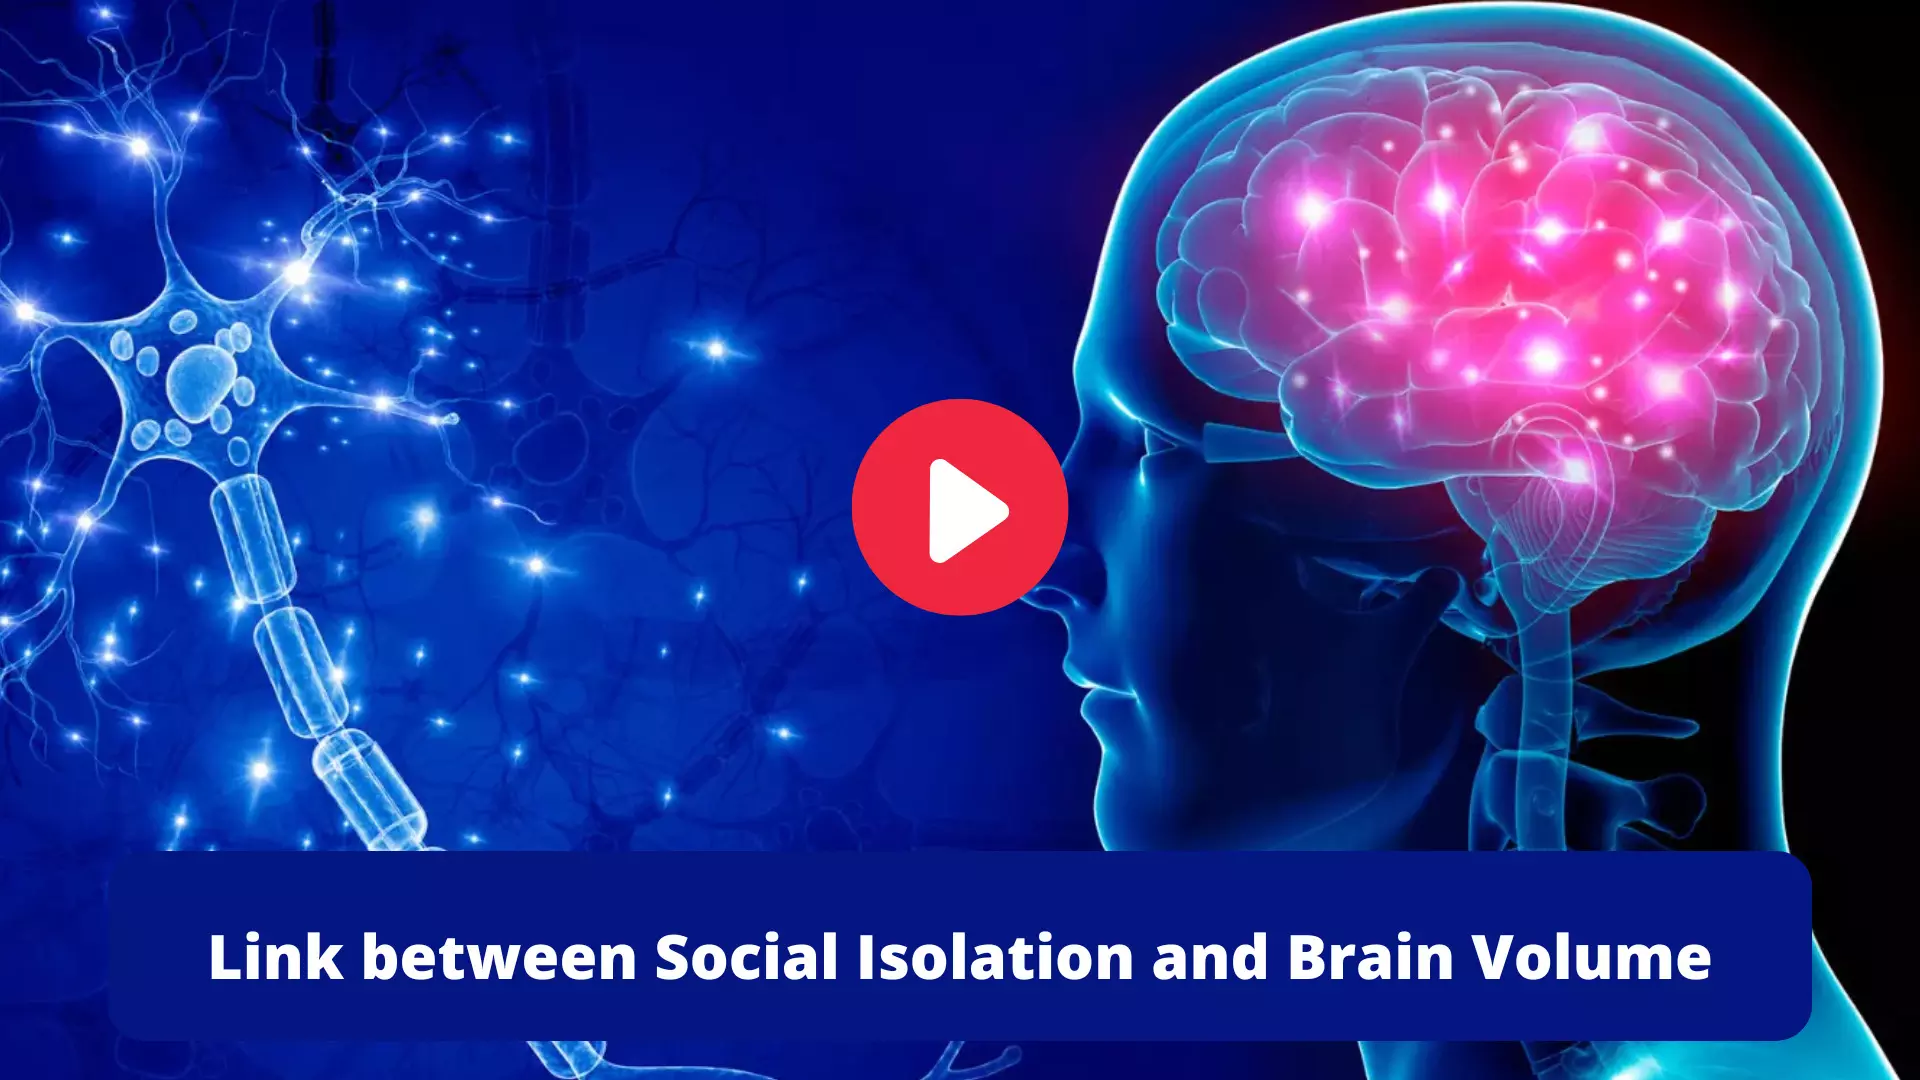 Link between Social Isolation and Brain Volume